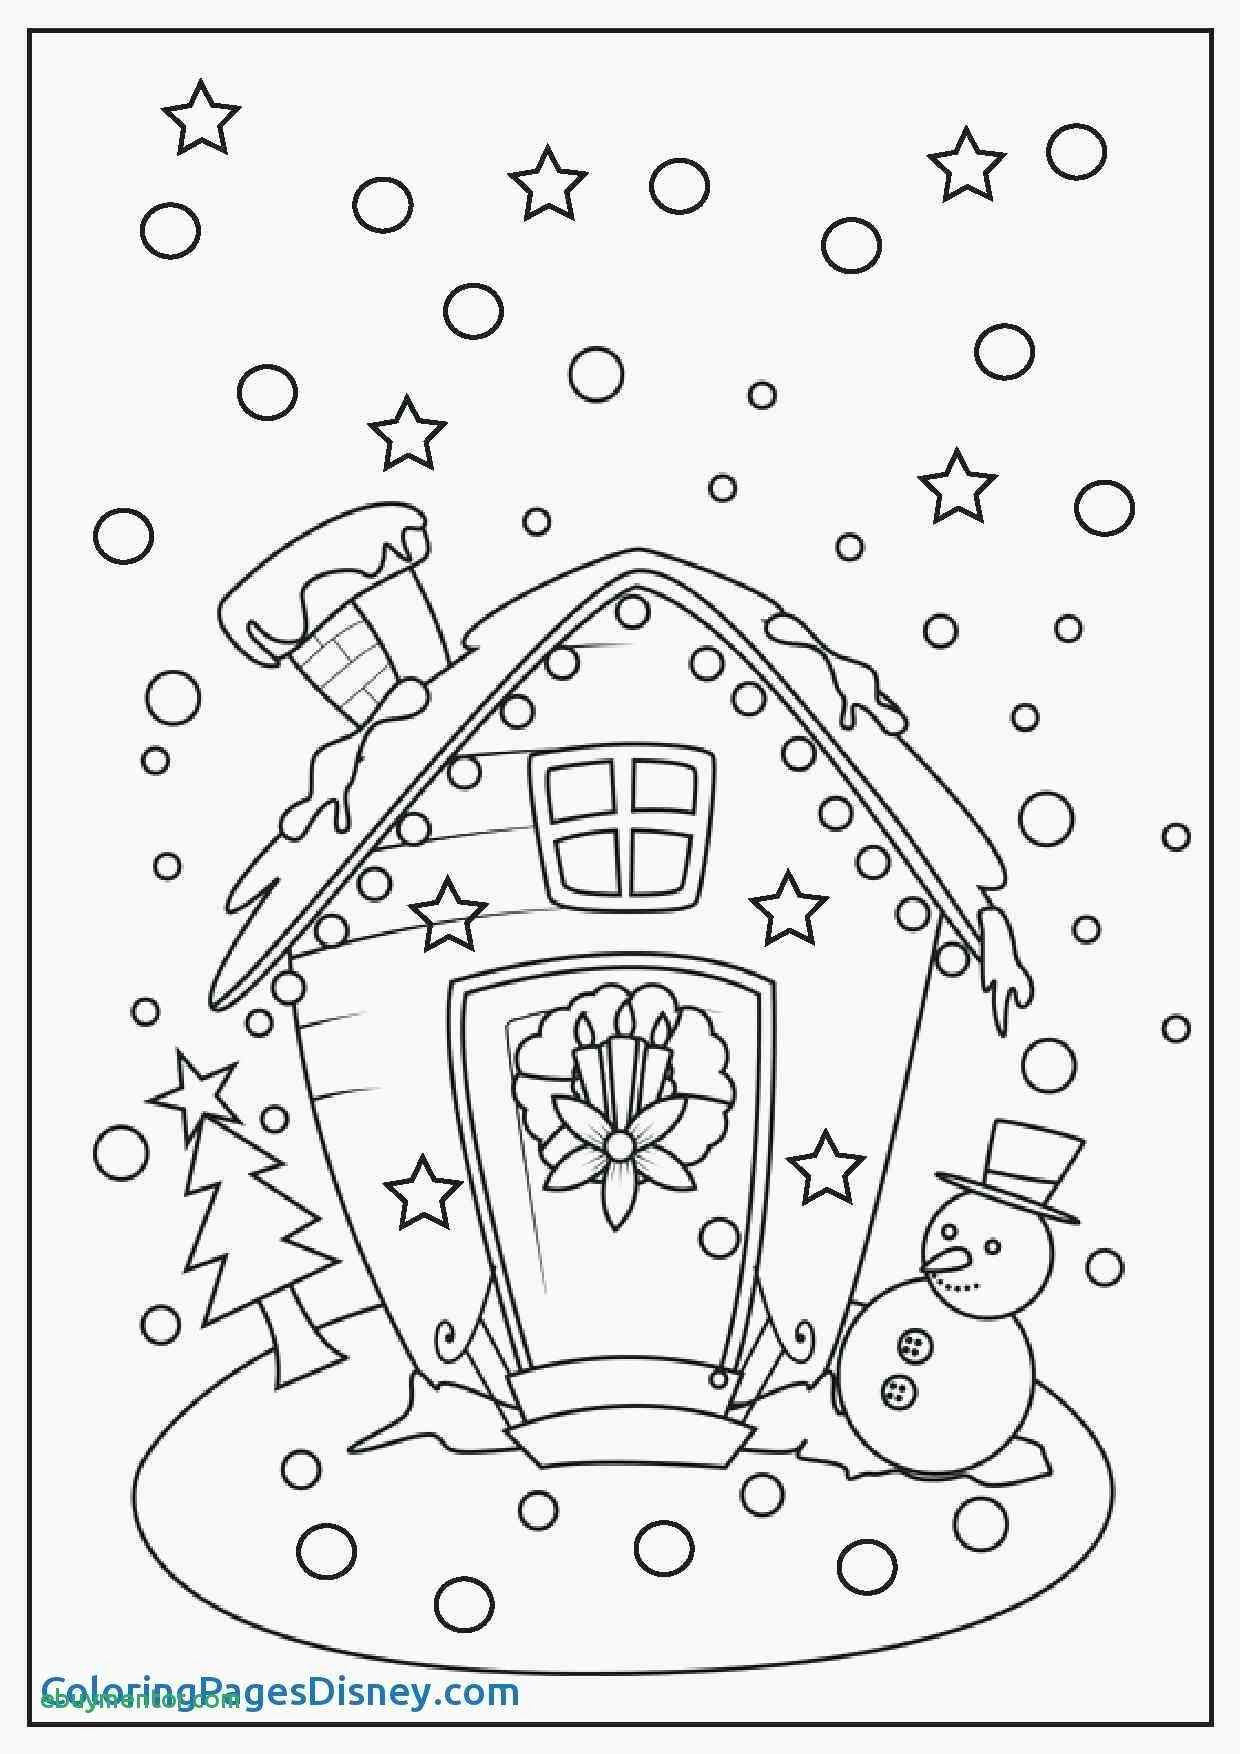 Drawing Ideas for Christmas Cards Cute Christmas Cards Printable Elegant Christmas Coloring Pages for